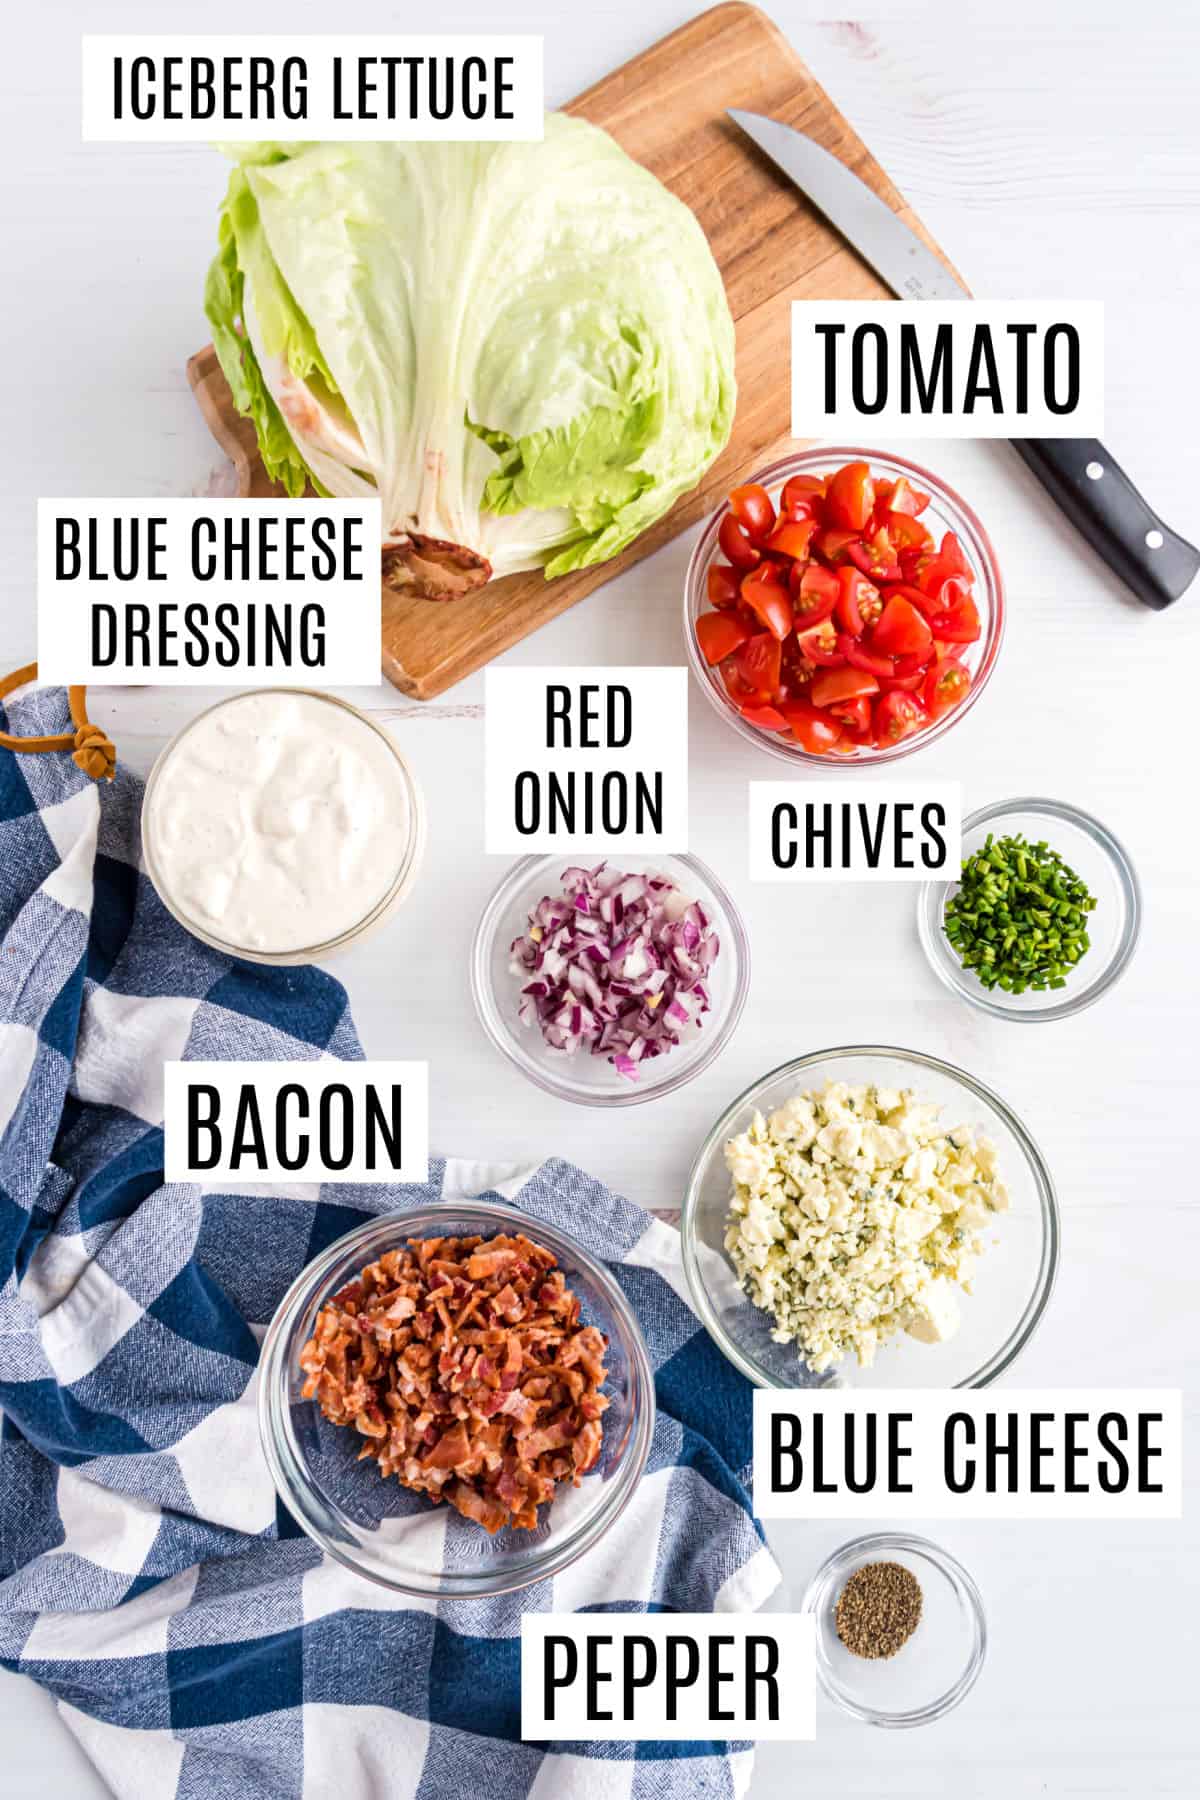 Ingredients needed to make a classic wedge salad.